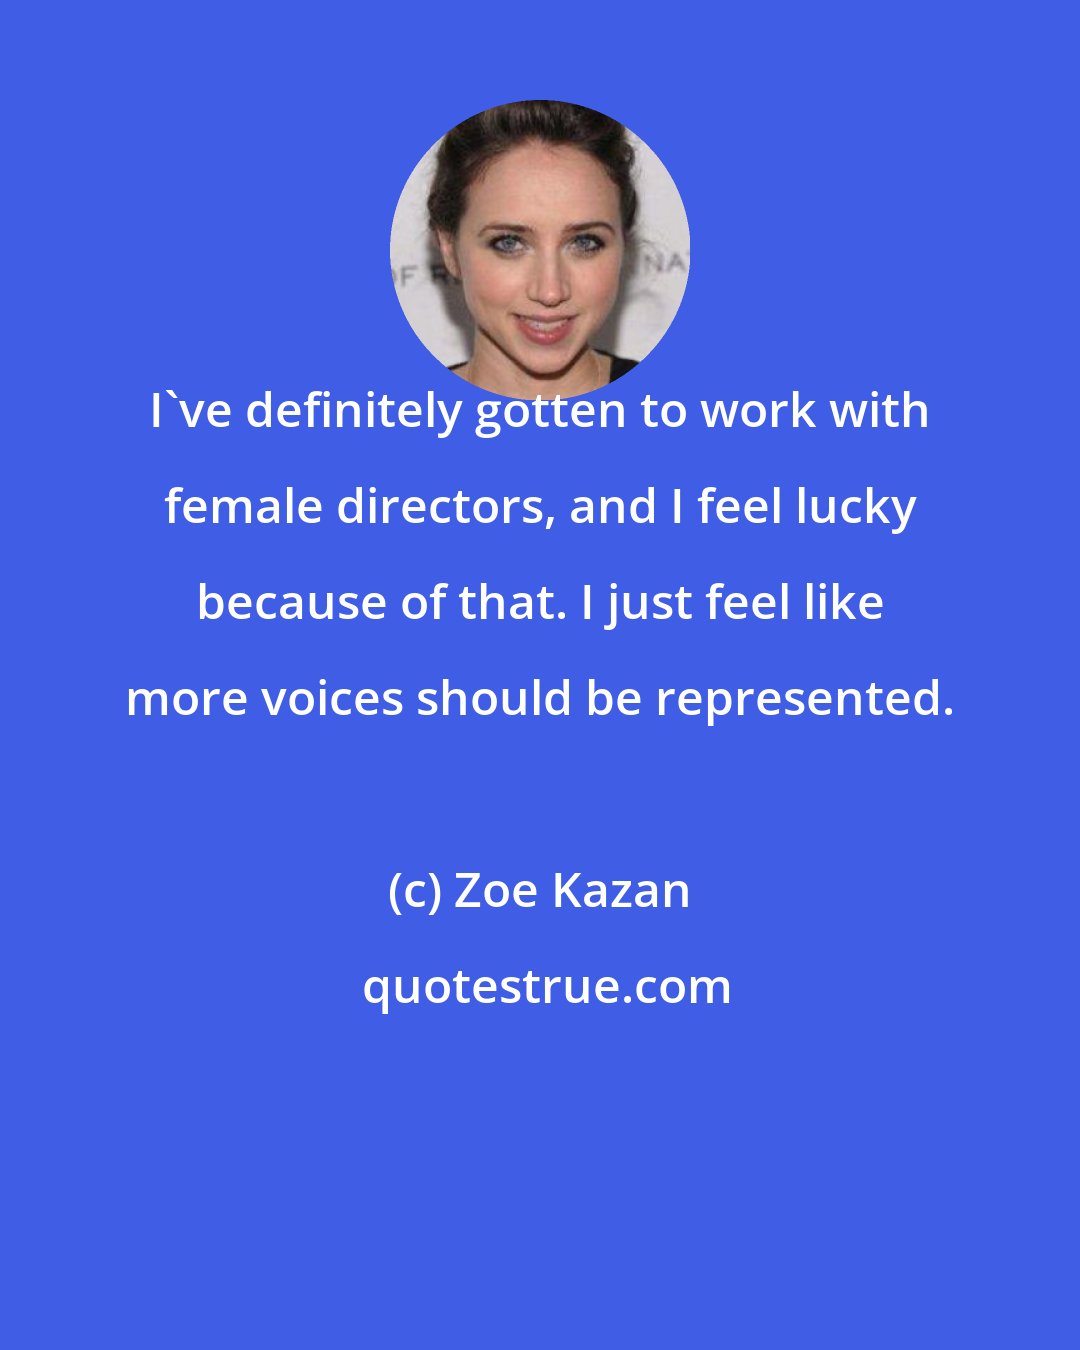 Zoe Kazan: I've definitely gotten to work with female directors, and I feel lucky because of that. I just feel like more voices should be represented.